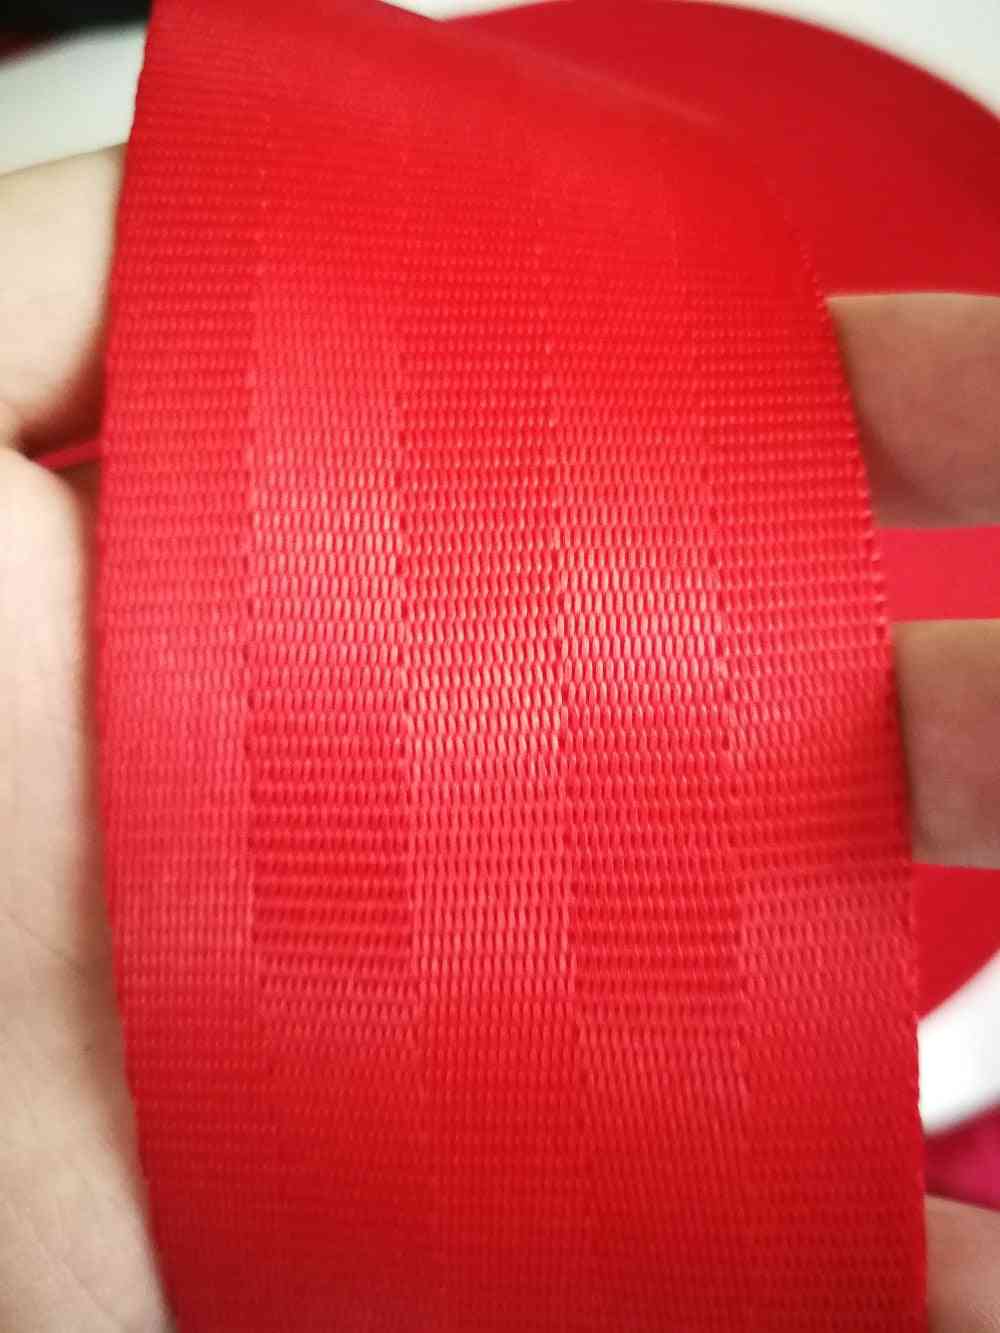 Modified Webbing Car Seat Belt For Child Safety Car Accessories